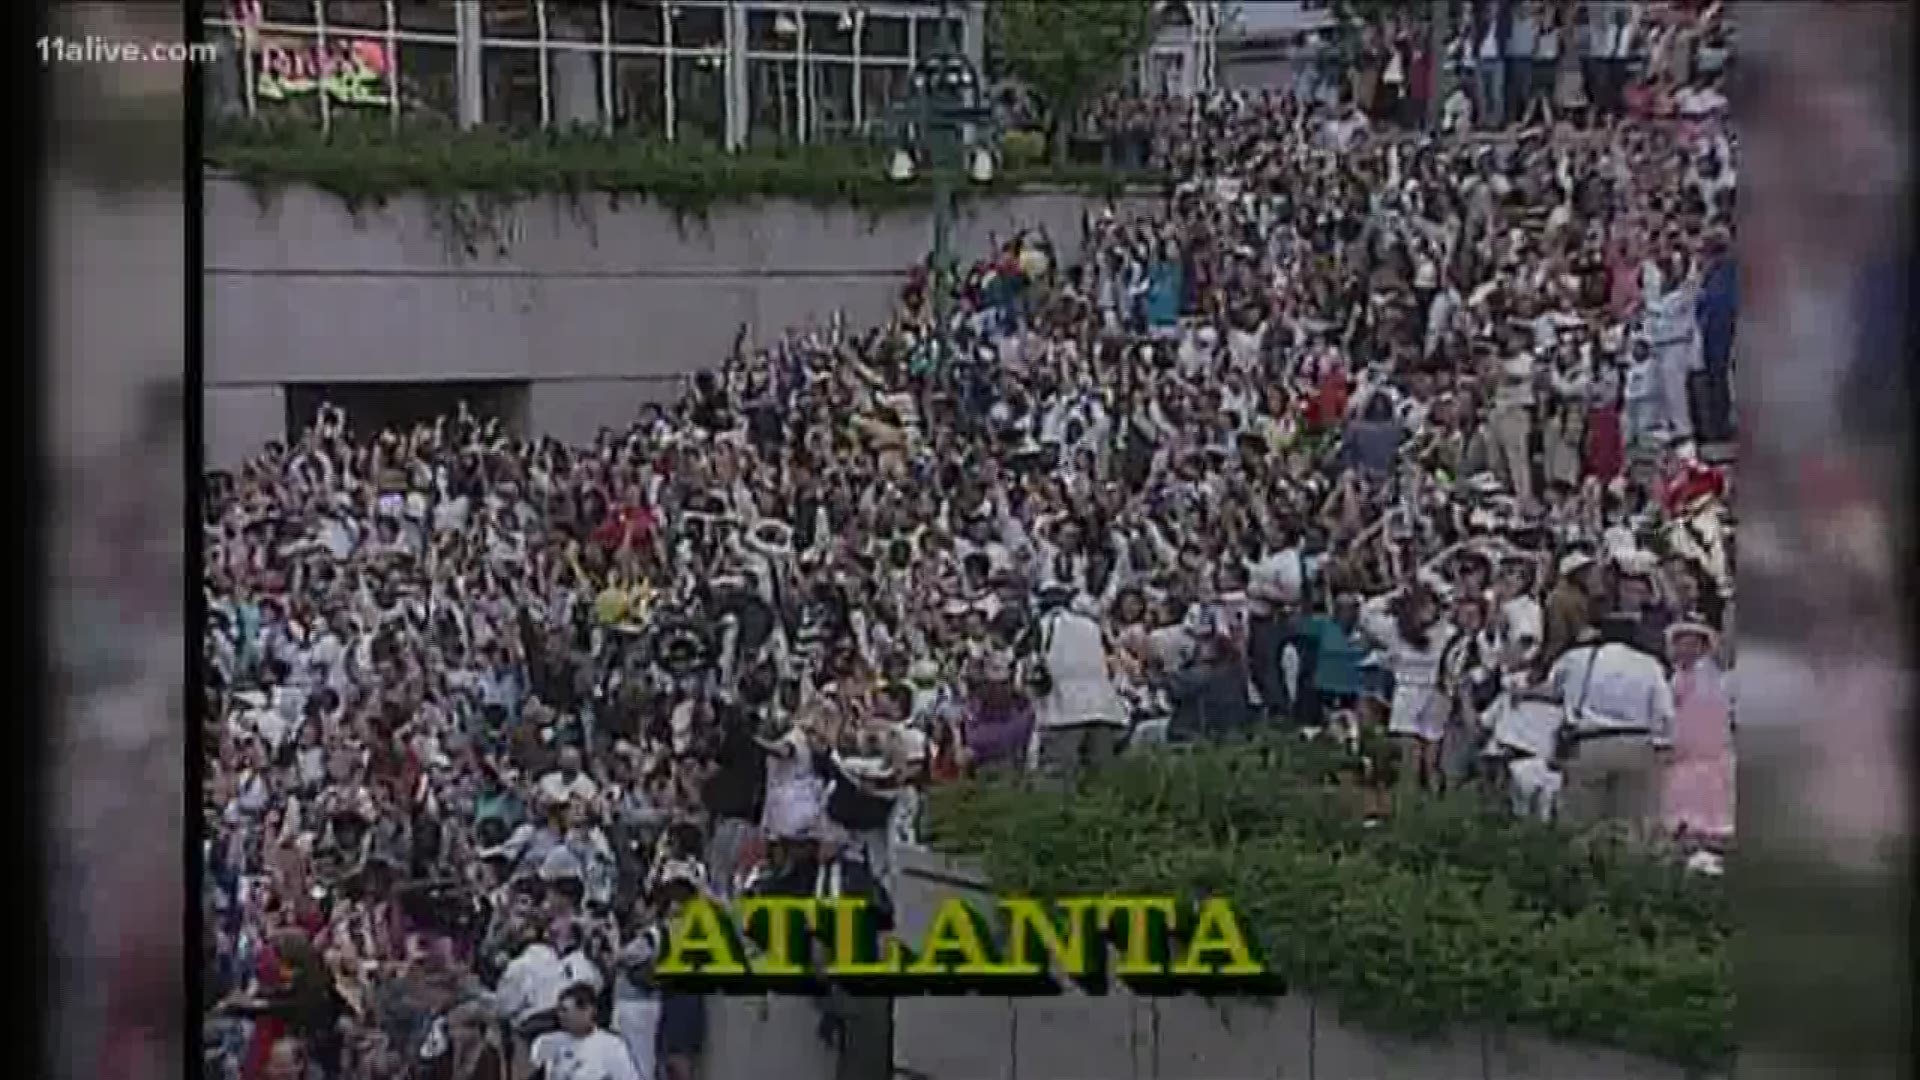 September 18, 1990, Atlanta --now that's a day to remember.